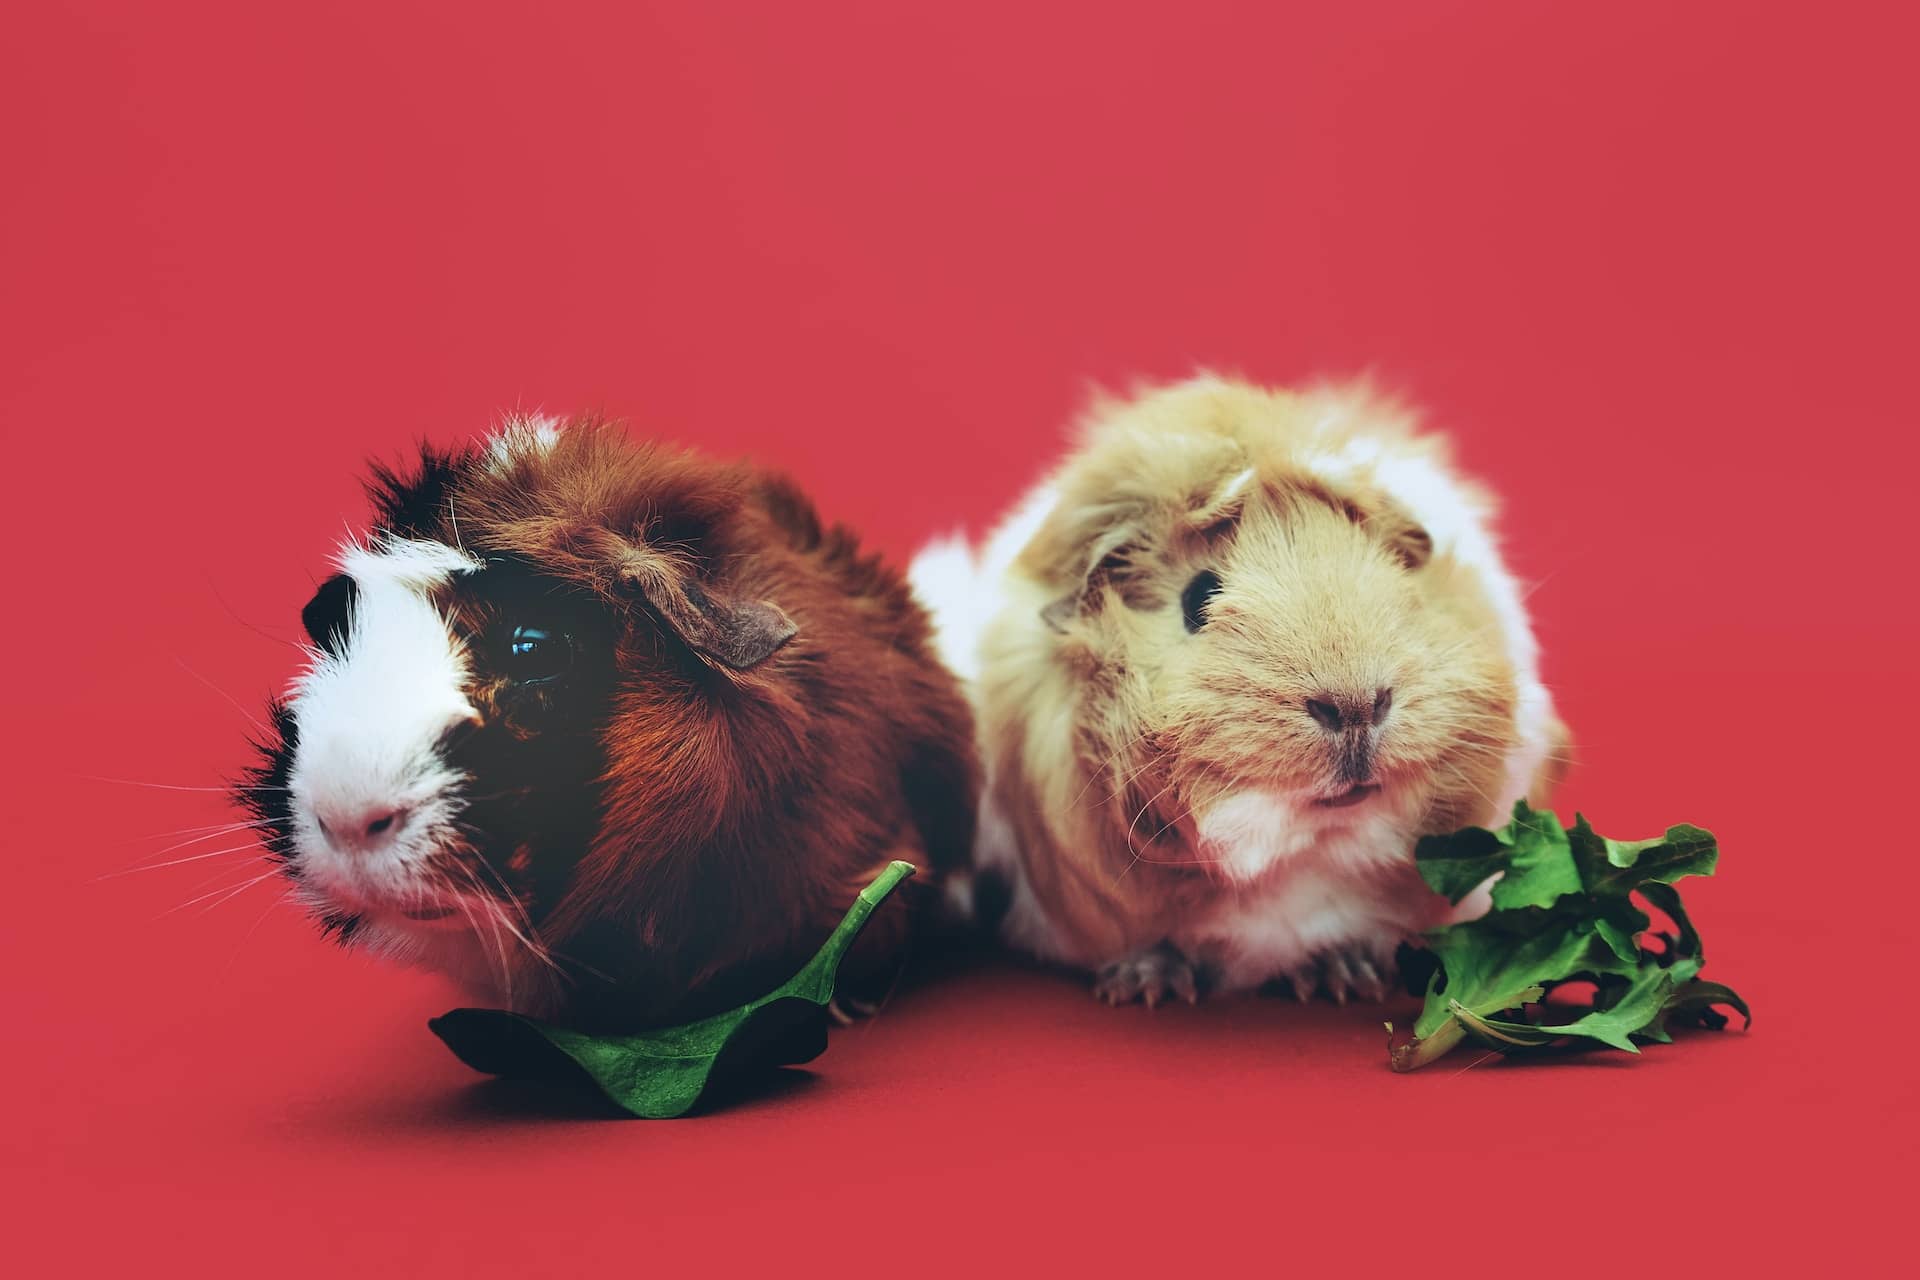 can guinea pigs eat kale